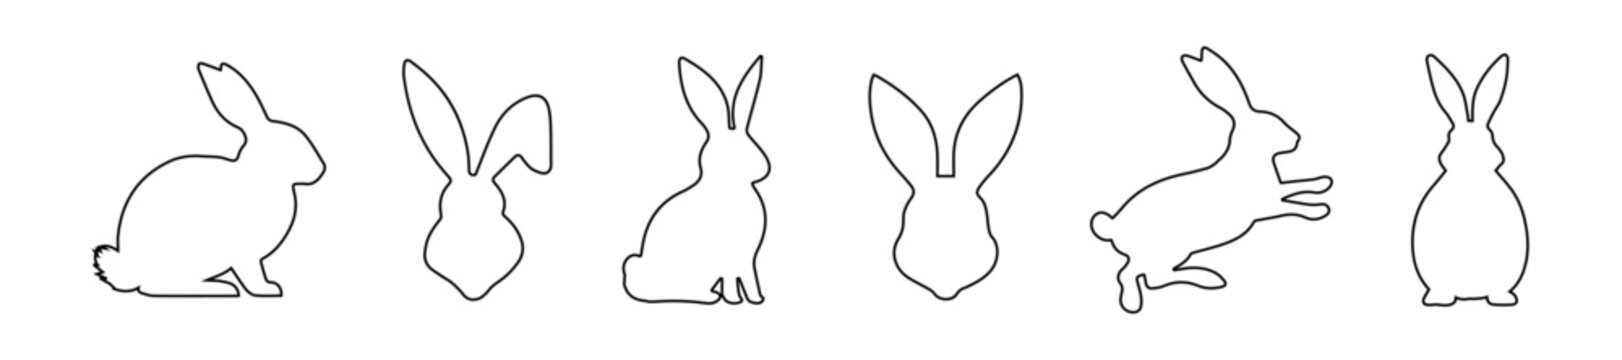 Set of rabbits in outline. Easter bunnies. Isolated on white background. A simple black icons of hares. Cute animals. Ideal for logo, emblem, pictogram, print, design element for greeting card.